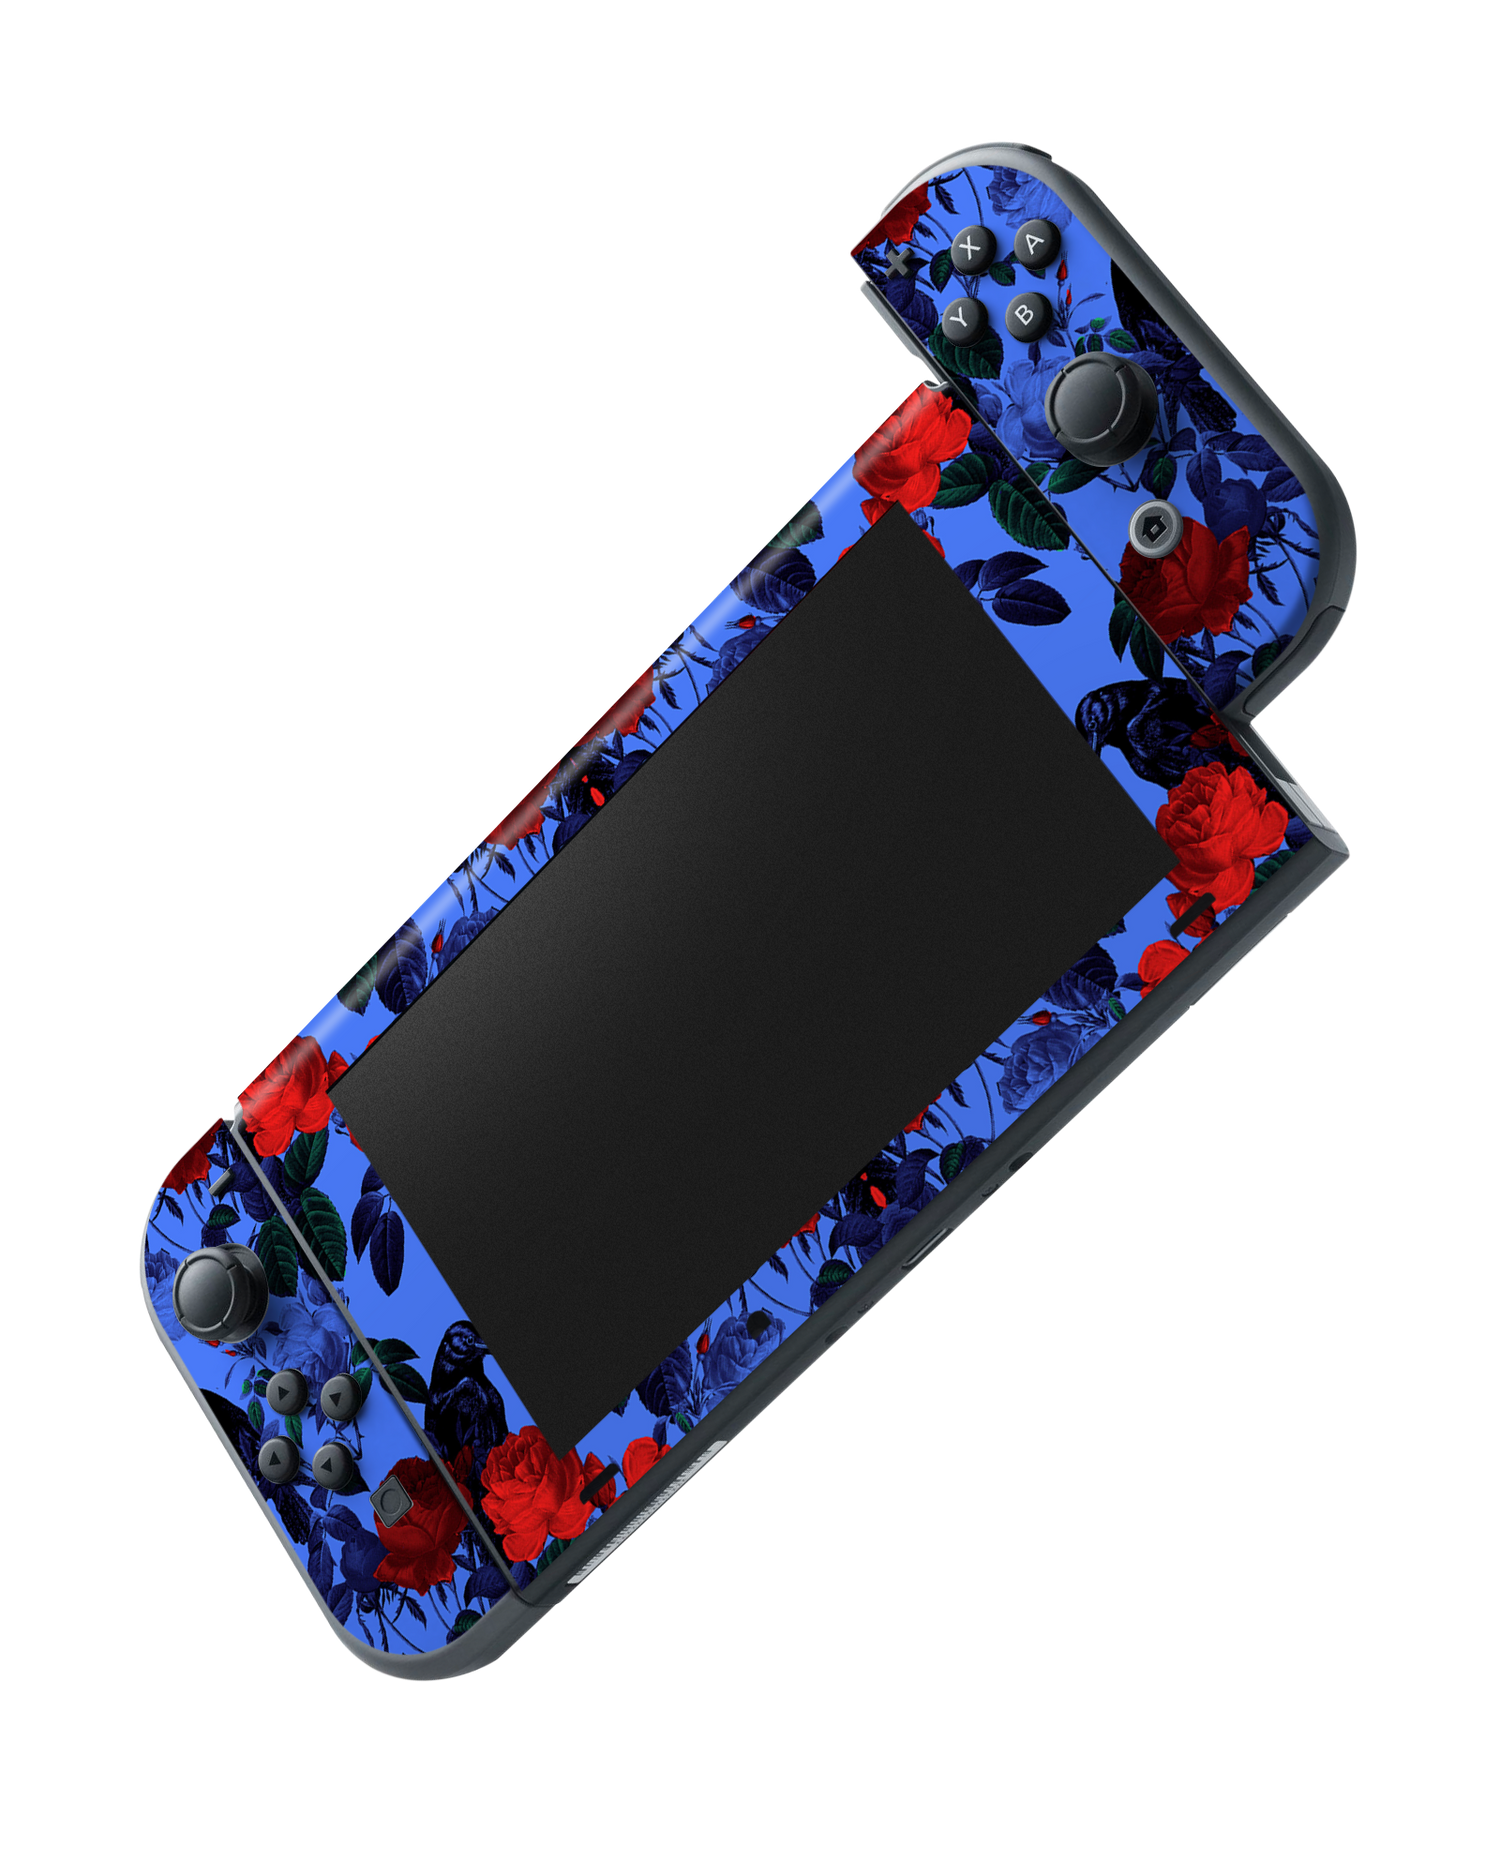 Roses And Ravens Console Skin for Nintendo Switch: Joy-Con removing 